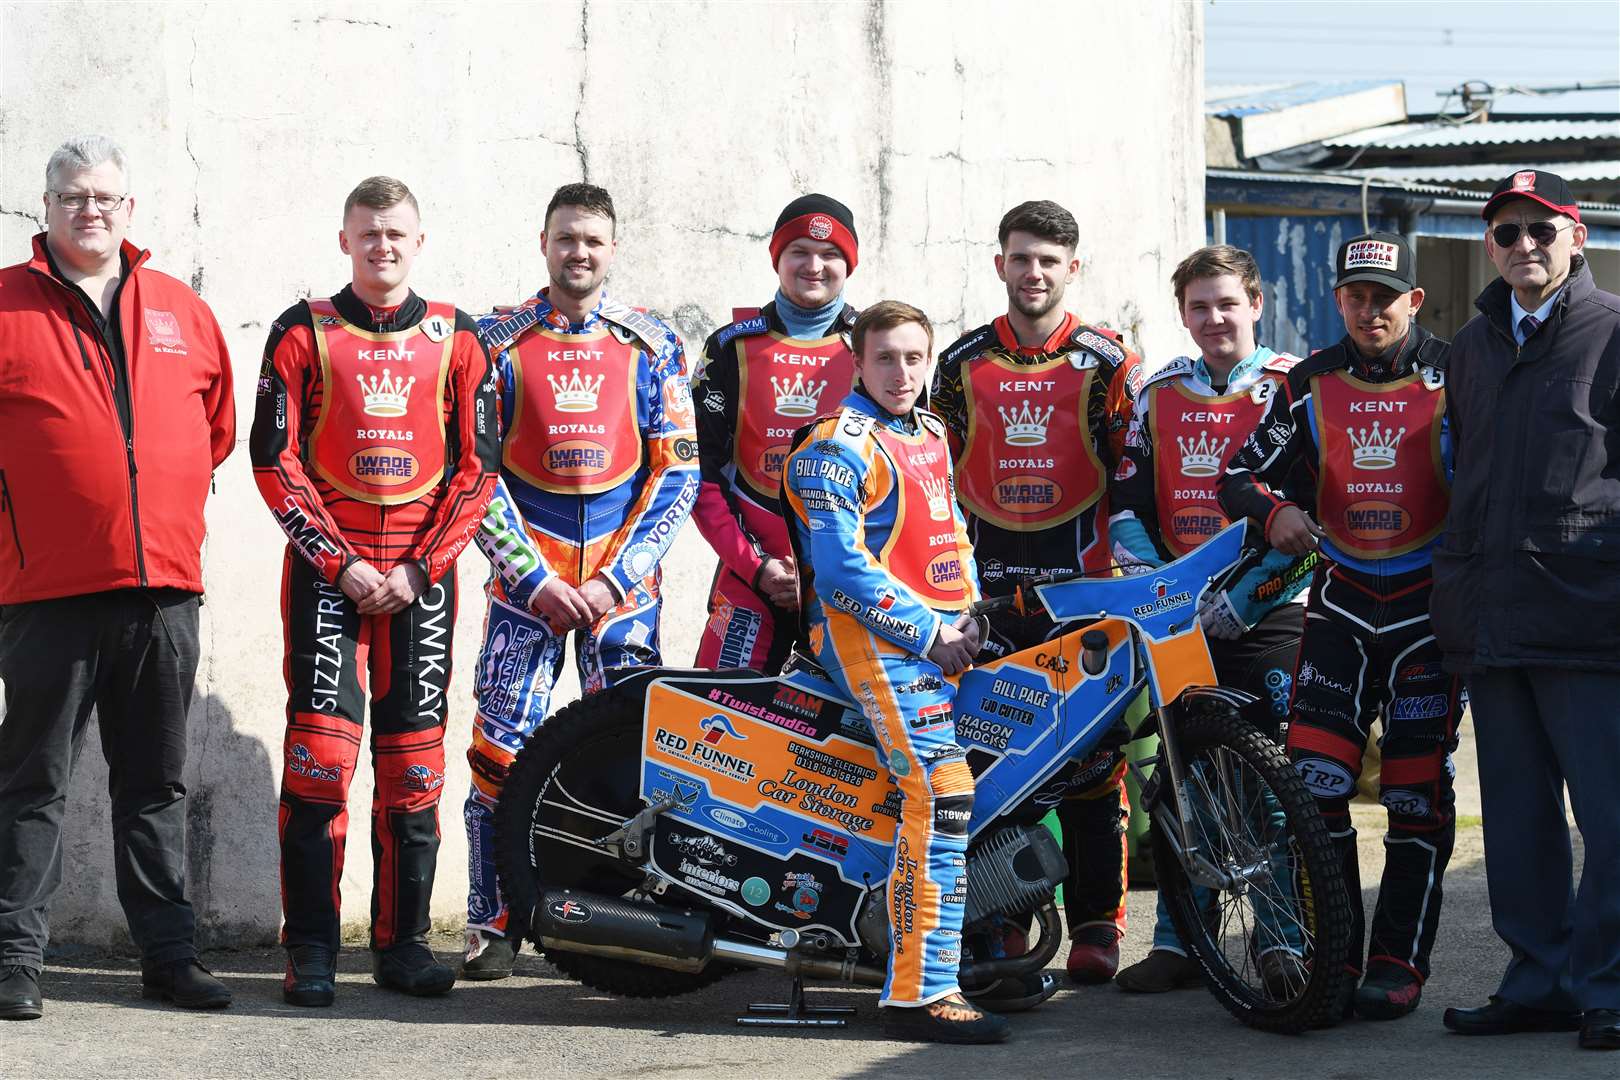 Kent Royals - the class of 22. From left: Si Kellow (promoter), Joe Alcock, Chris Watts, Sam Woolley, Danno Verge (captain, on the bike), Alfie Bowtell, Jamie Halder, Ben Morley, John Sampford (manager) Picture: Barry Goodwin